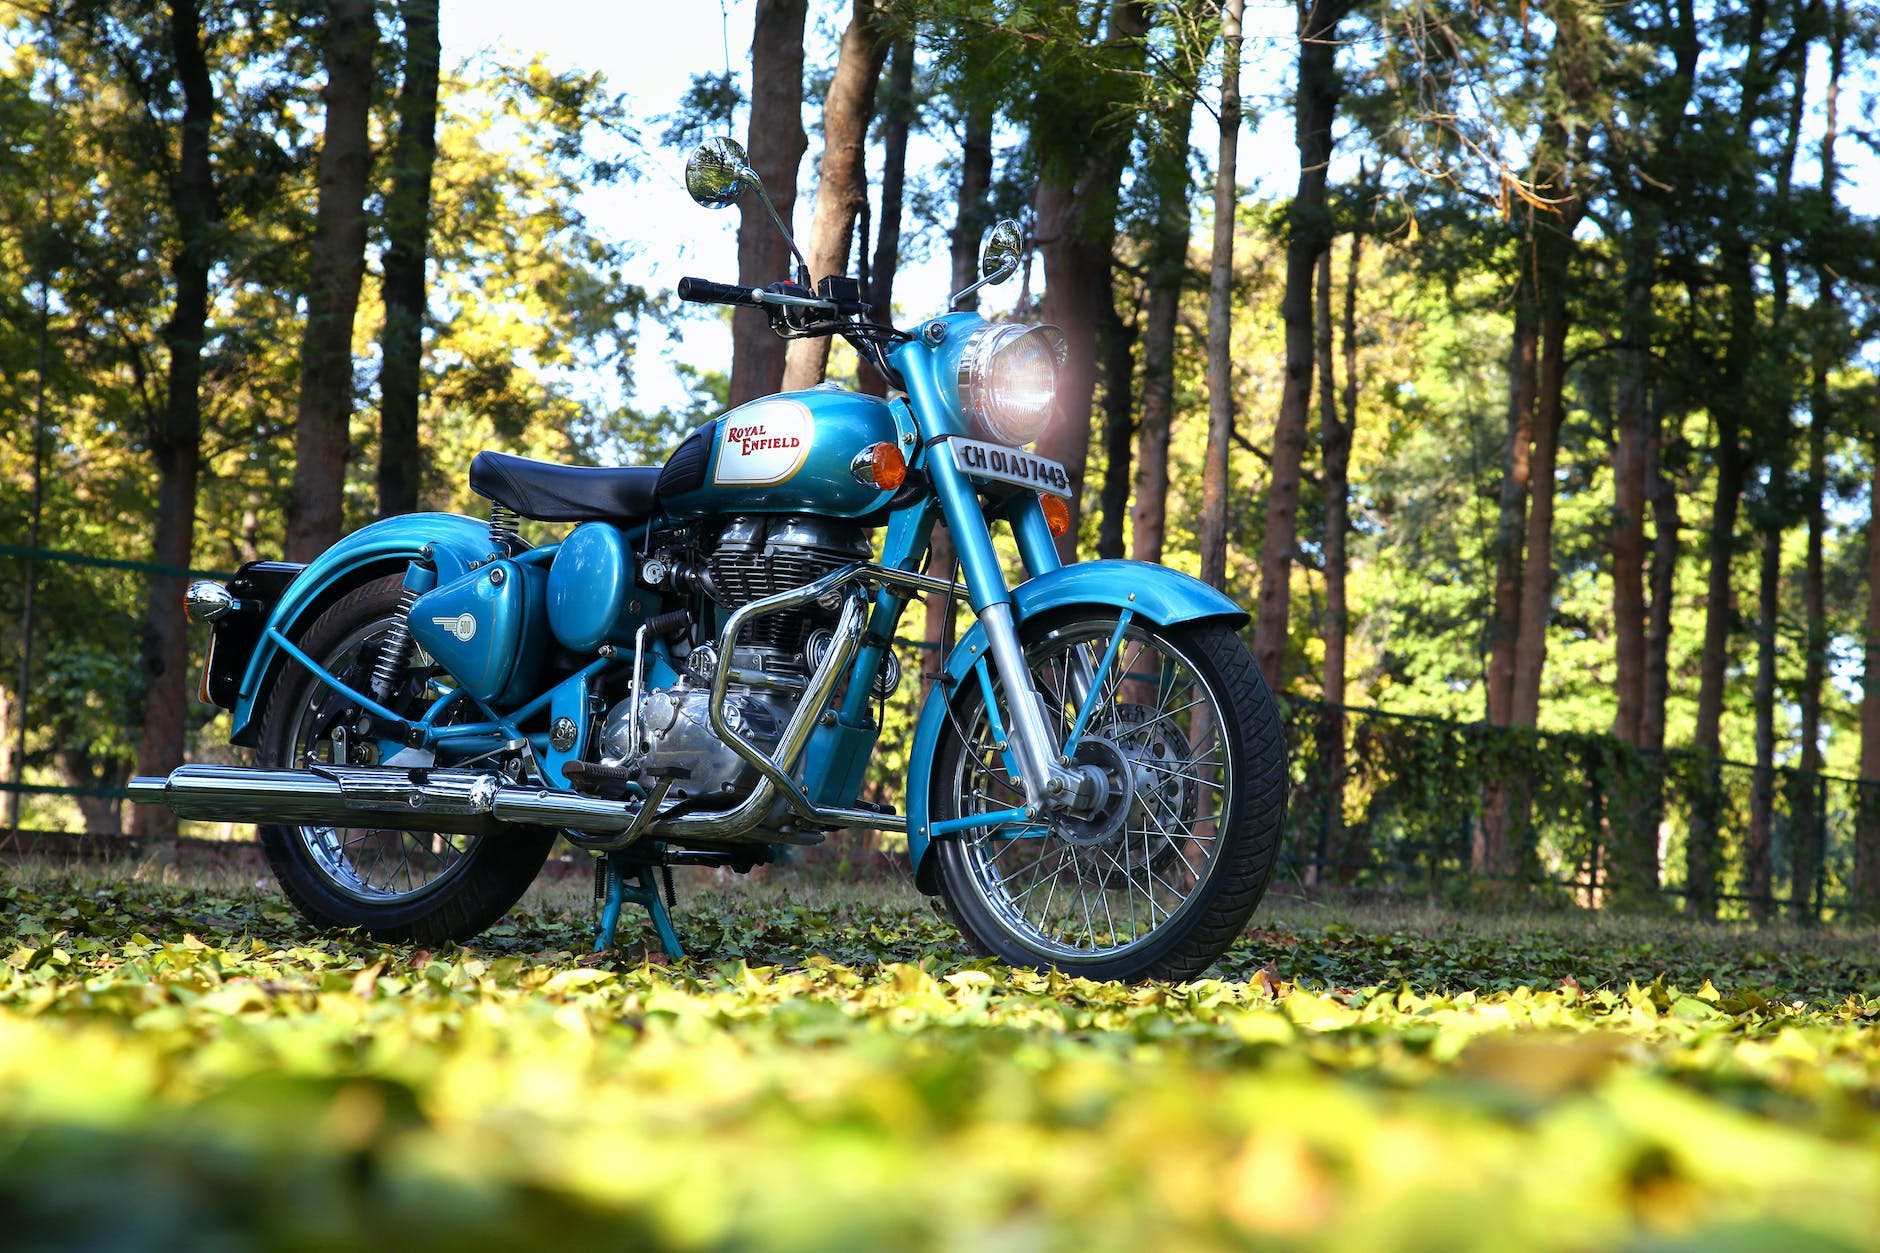 parked classic blue motorcycle on fallen leaves